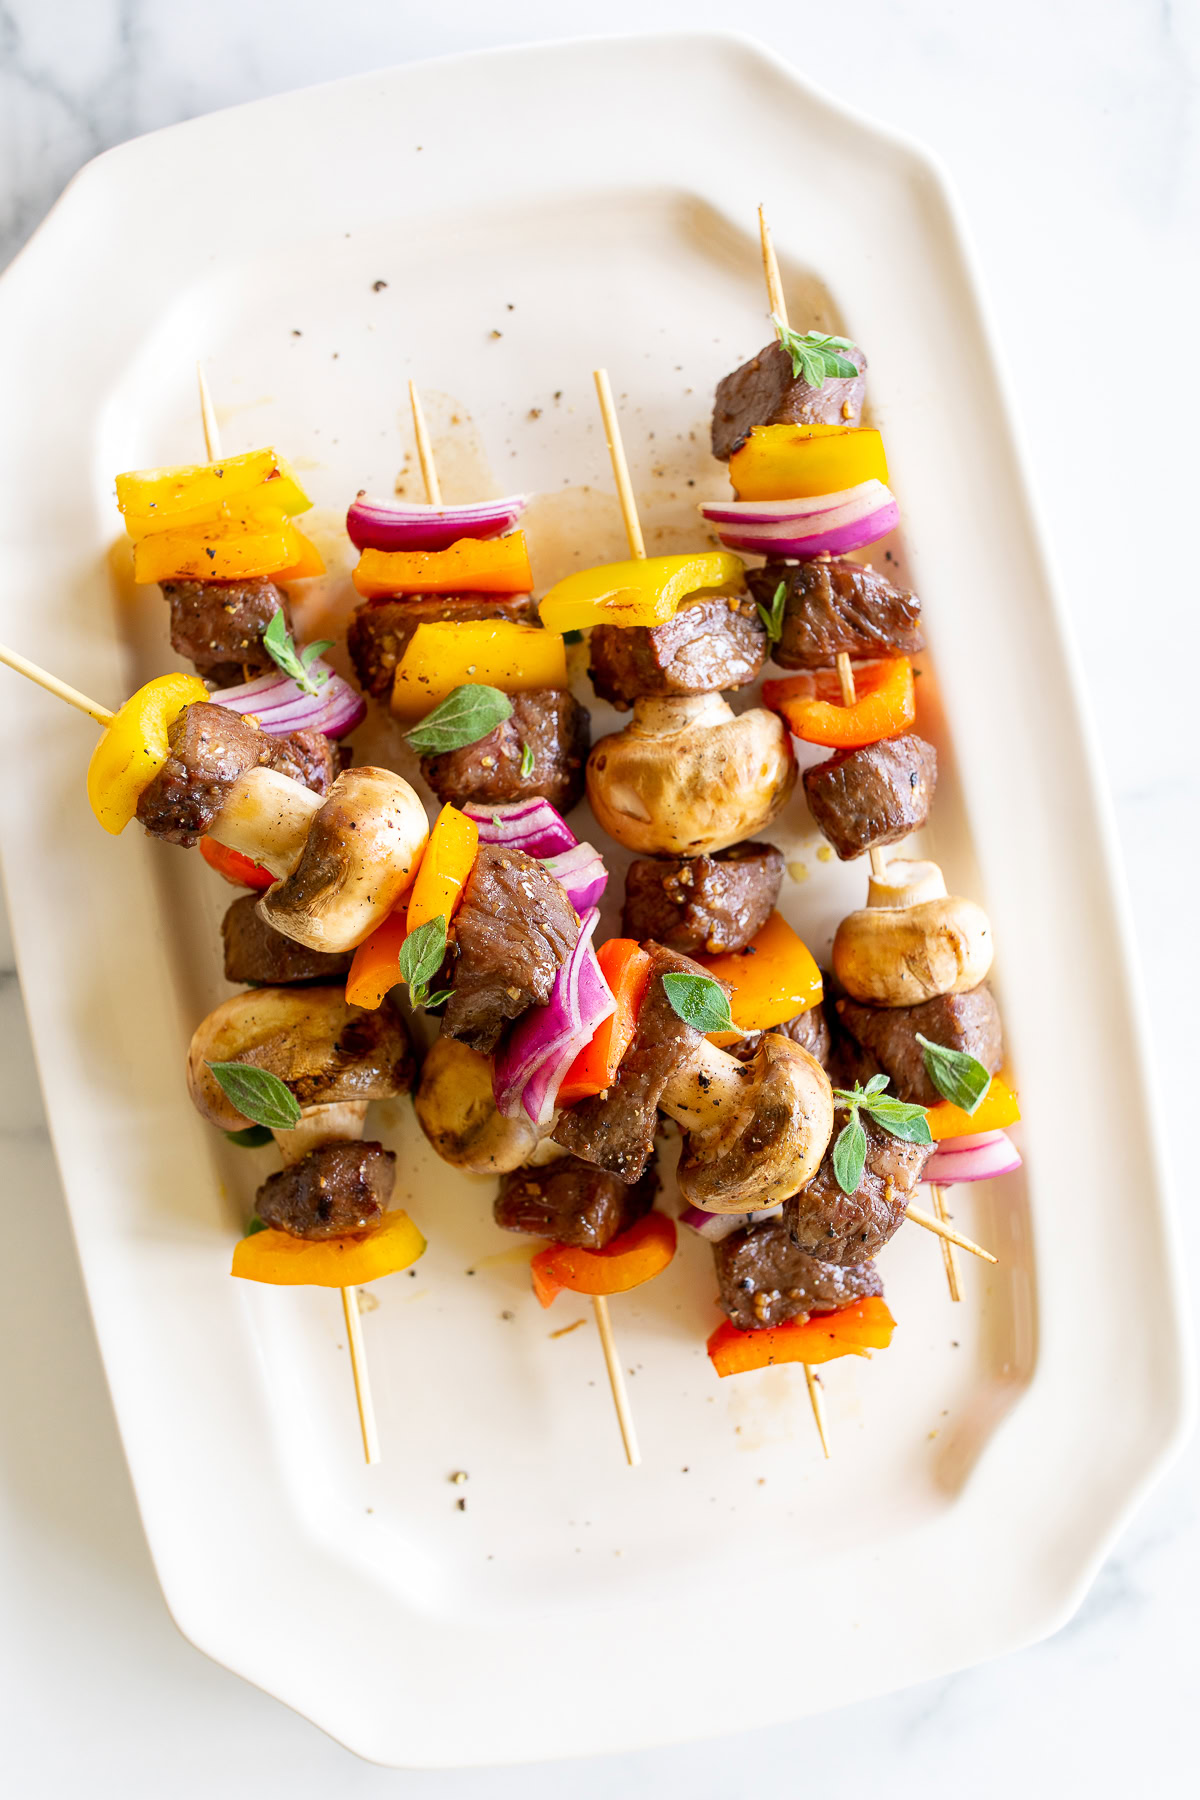 Grilled steak kabobs with beef, mushrooms, bell peppers, and red onions, garnished with herbs and served on a white rectangular plate.